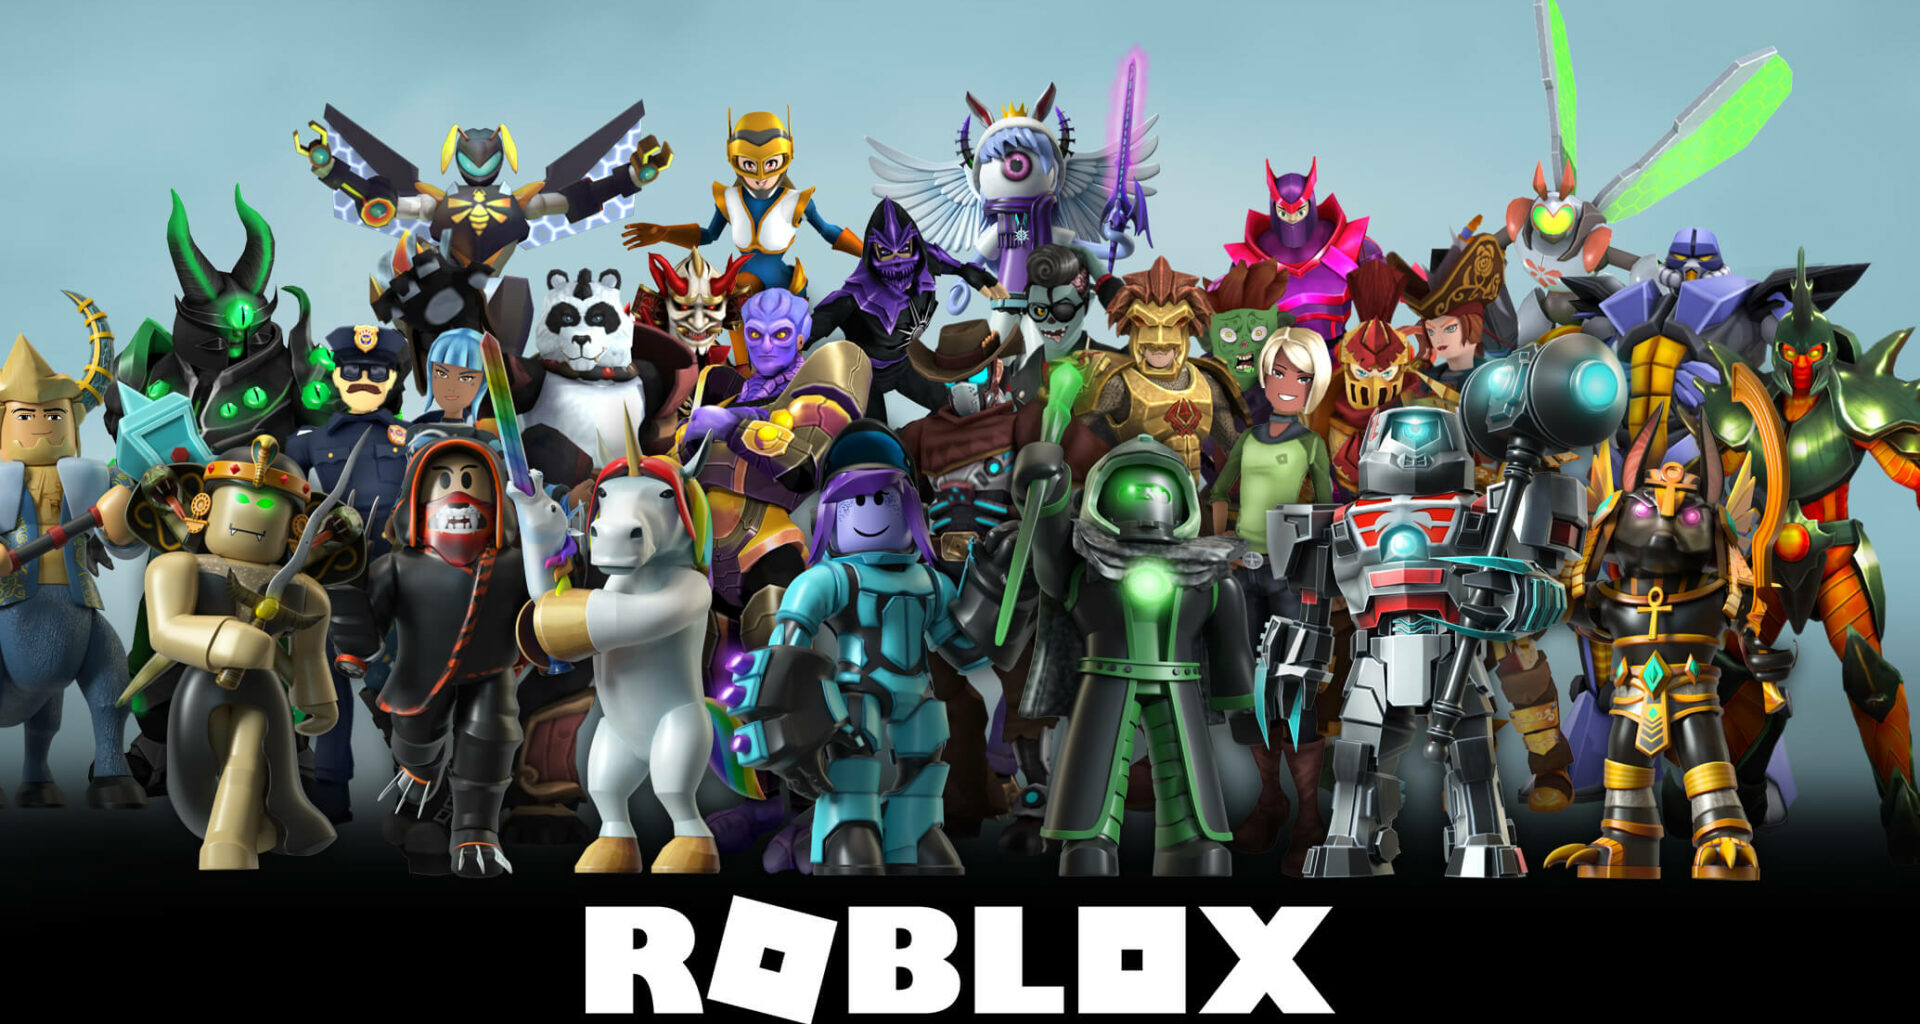 Download Roblox Apk For Free If You Can T Get Minecraft Apk Legally - roblox windows mobile